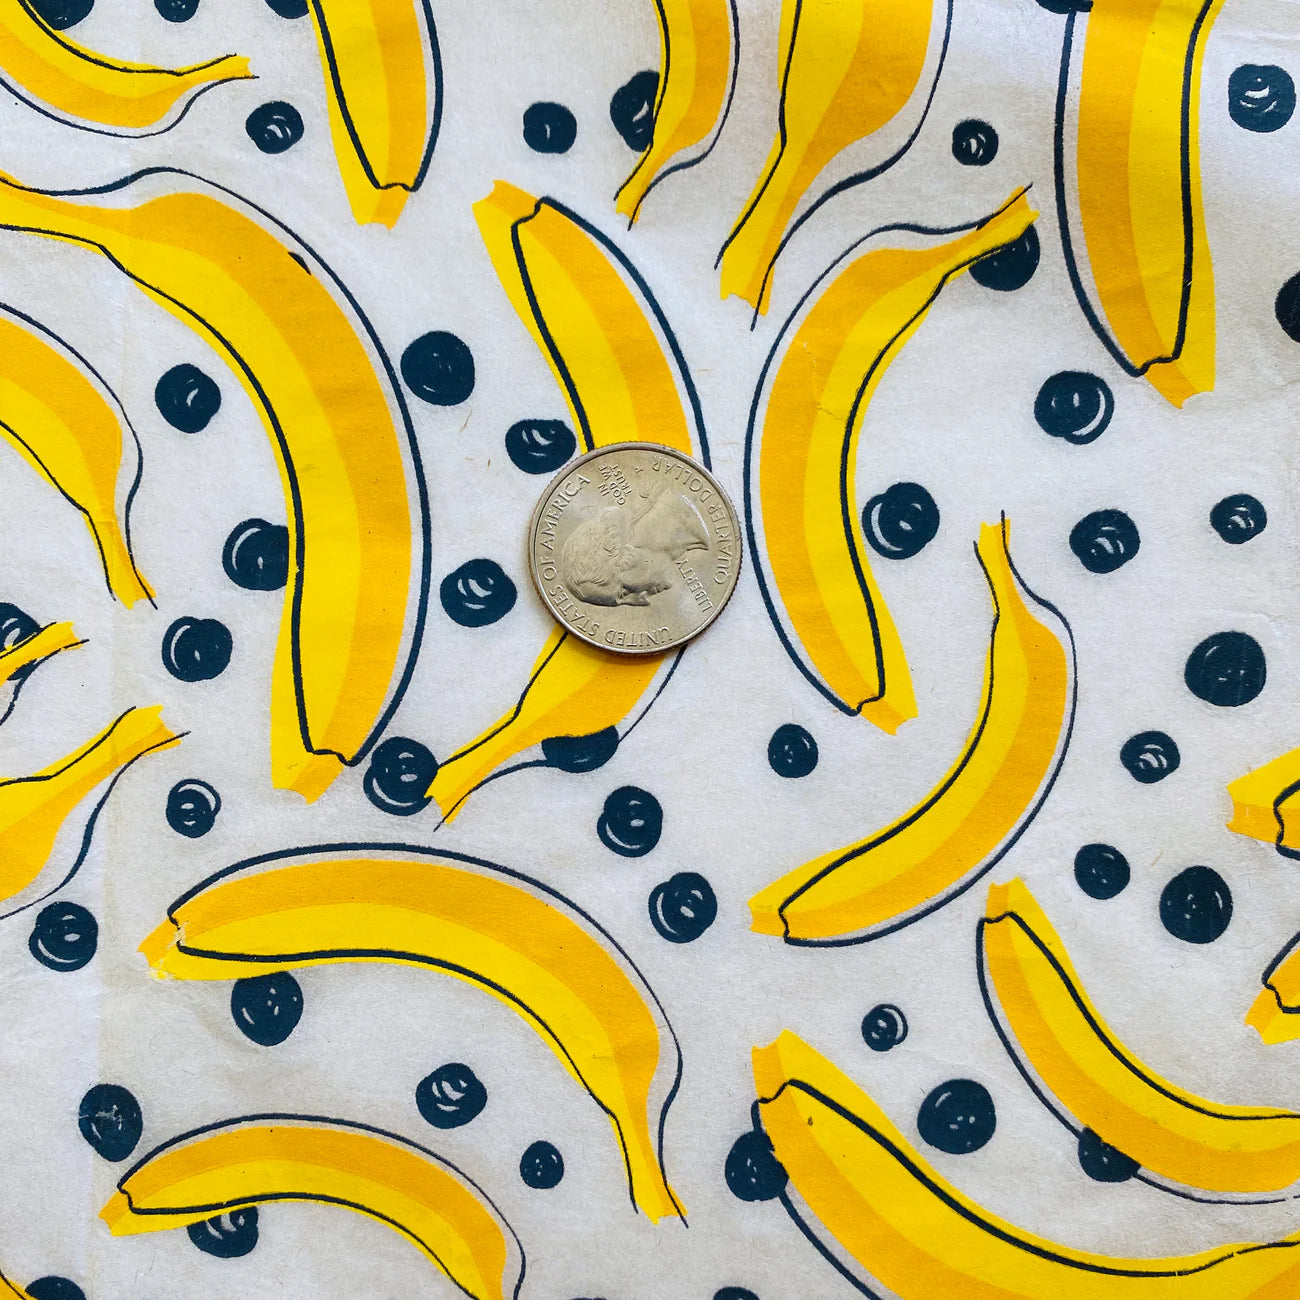 Bananas - Great White North Pottery Supplies